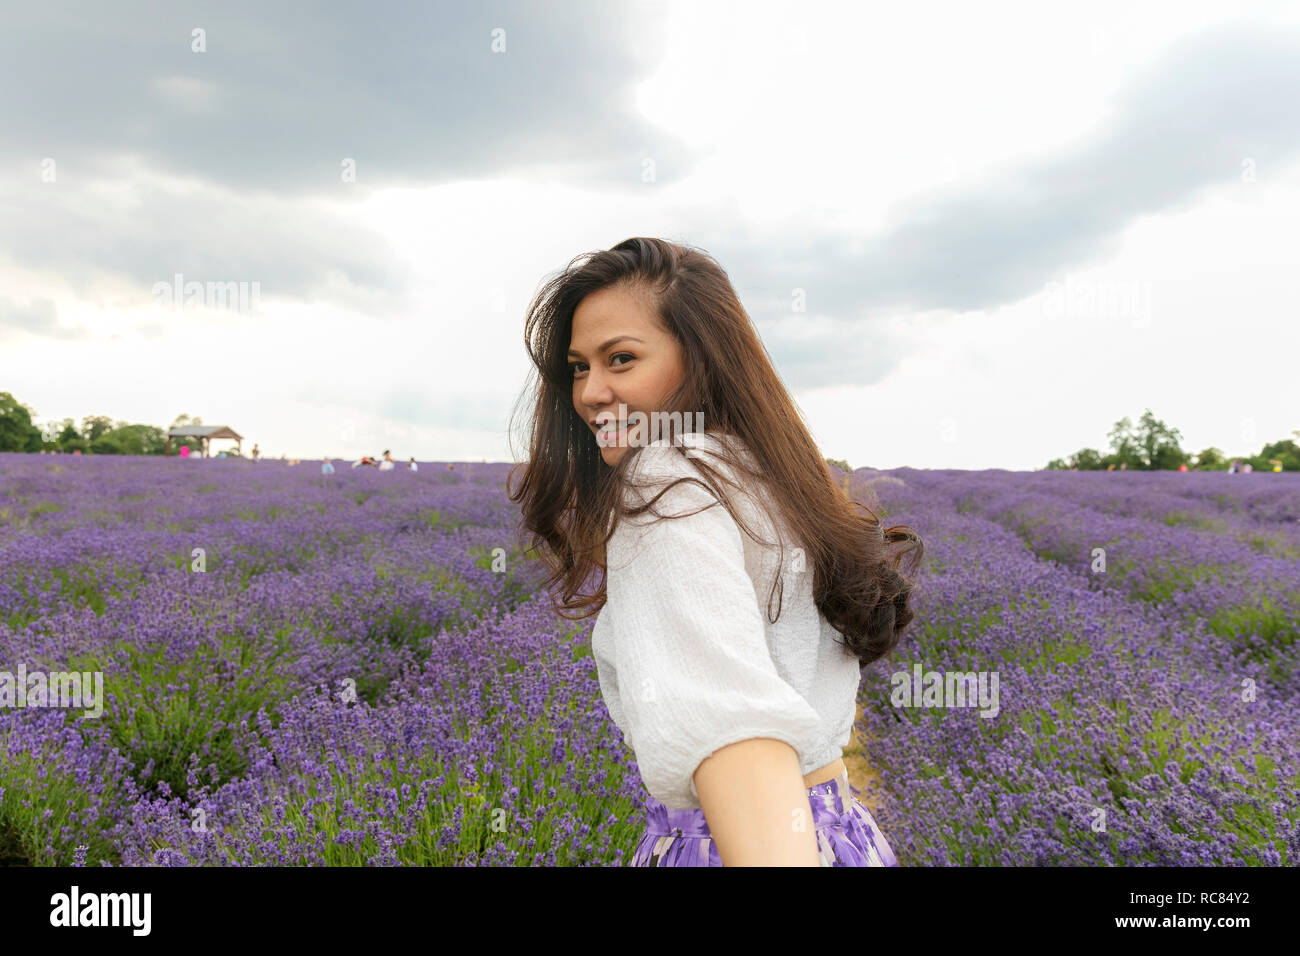 Mid adult woman with long brown hair looking over her shoulder in lavender field Stock Photo